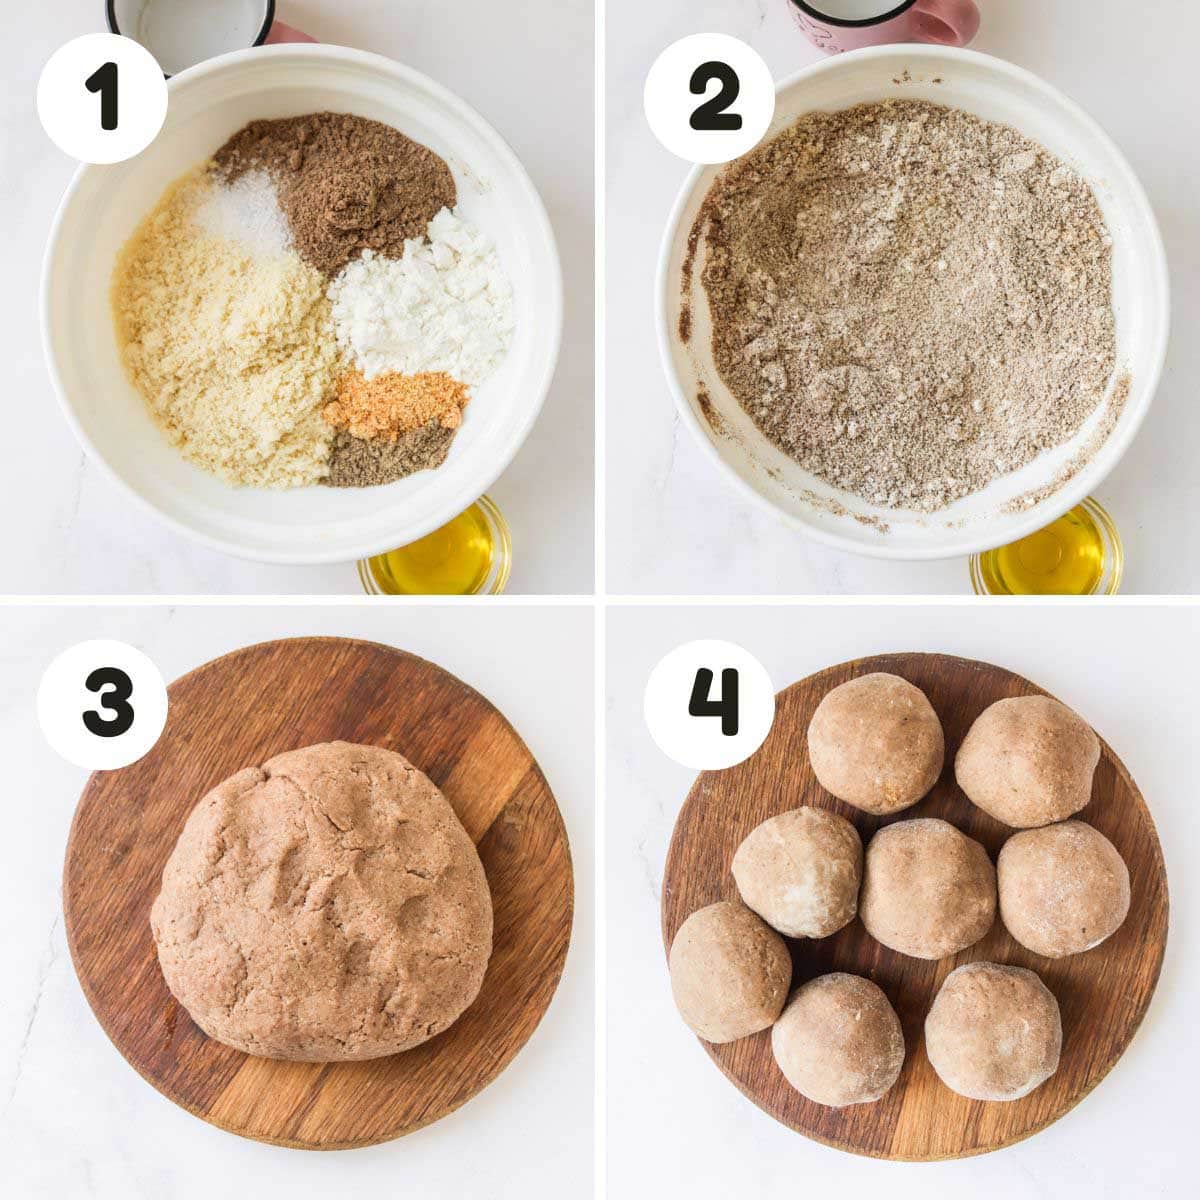 Steps to make the tortillas.